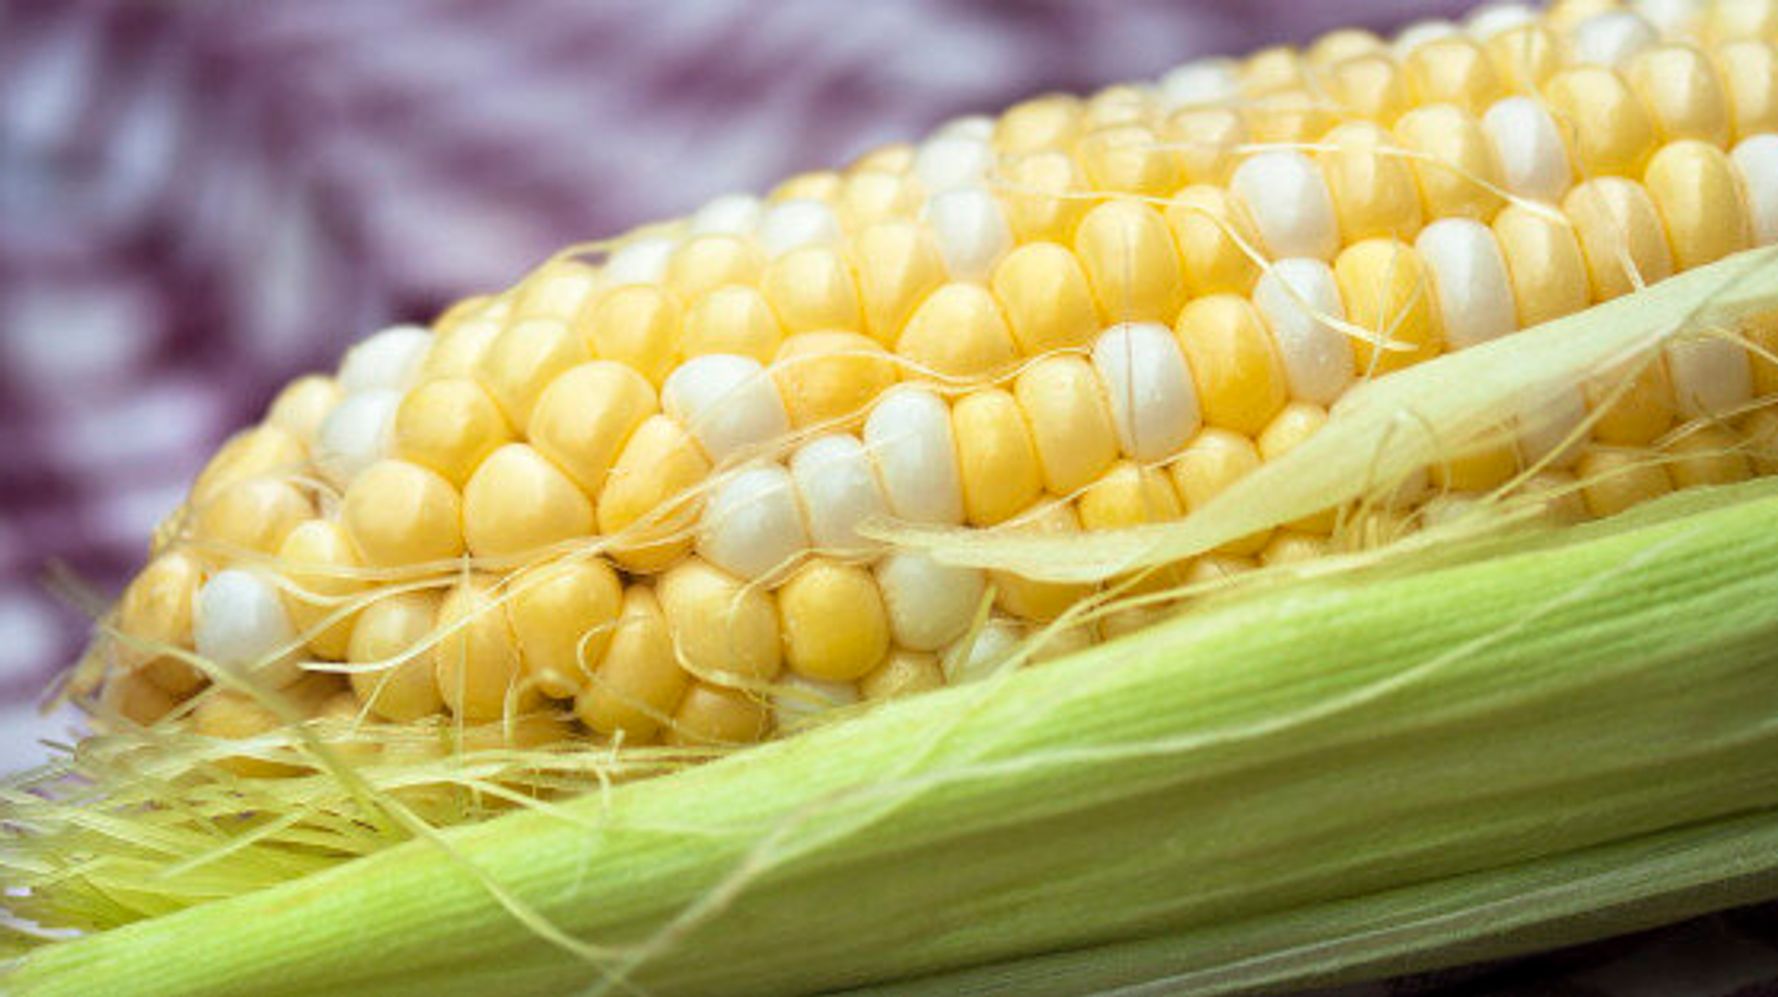 is.corn.good for you